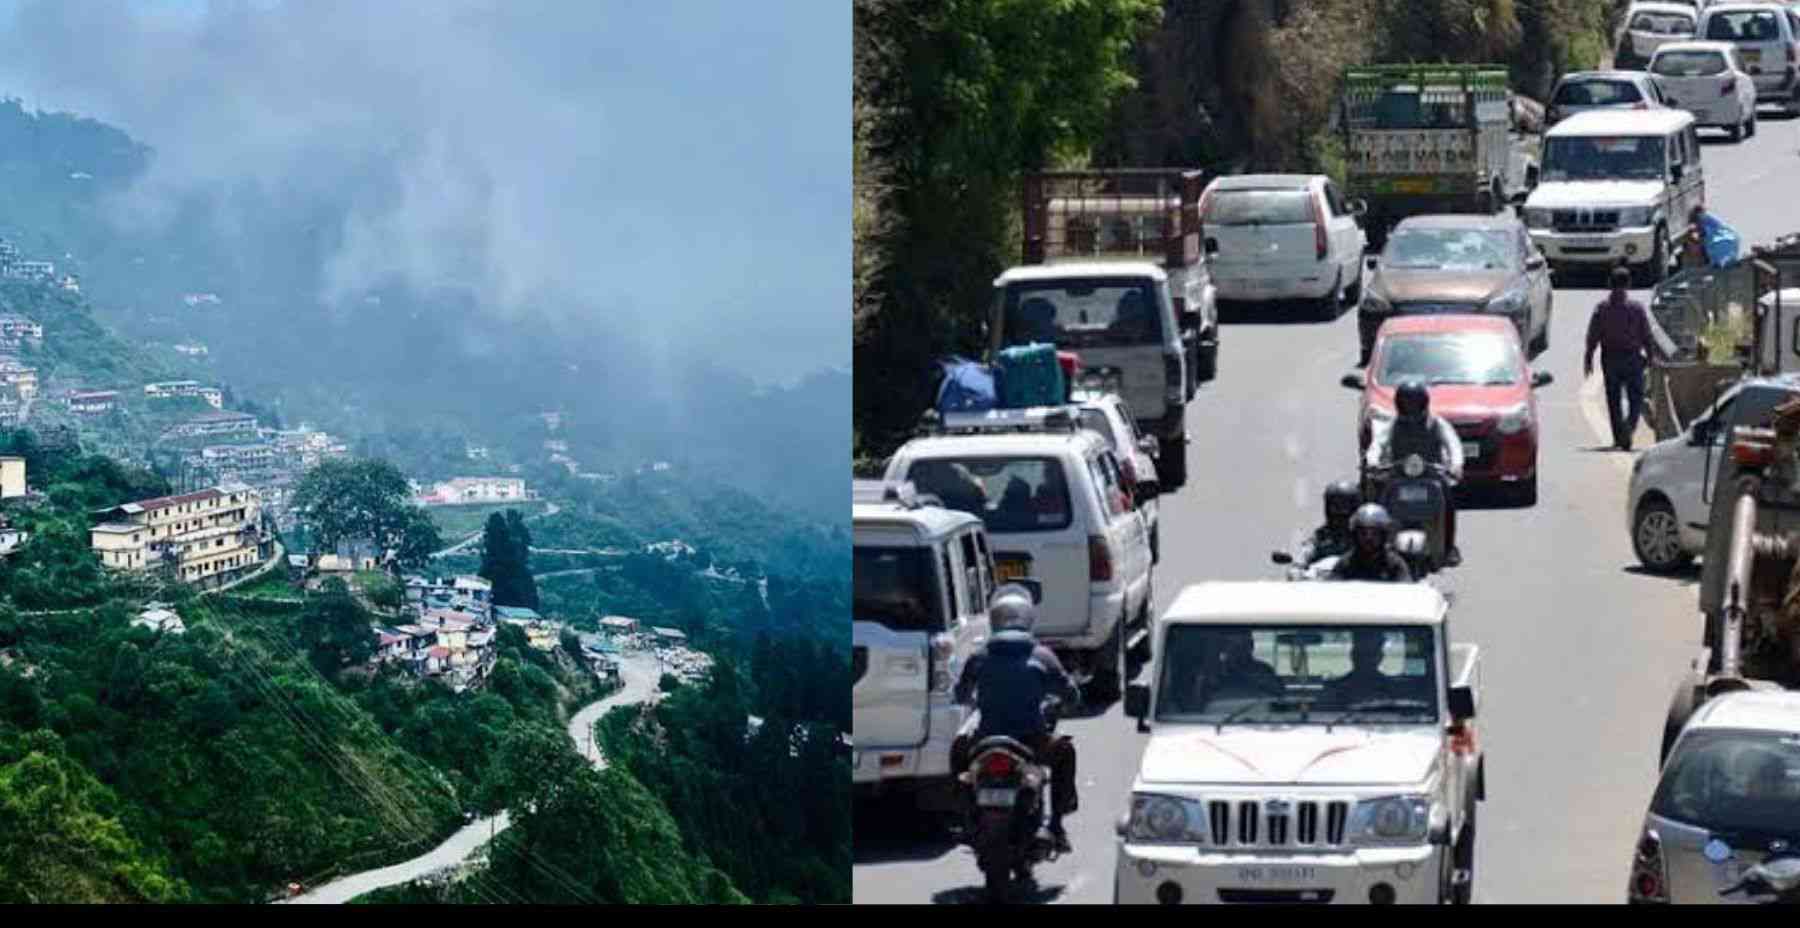 Uttarakhand news: There is a plan to visit Mussoorie Dehradun, so first see the new traffic route plan.